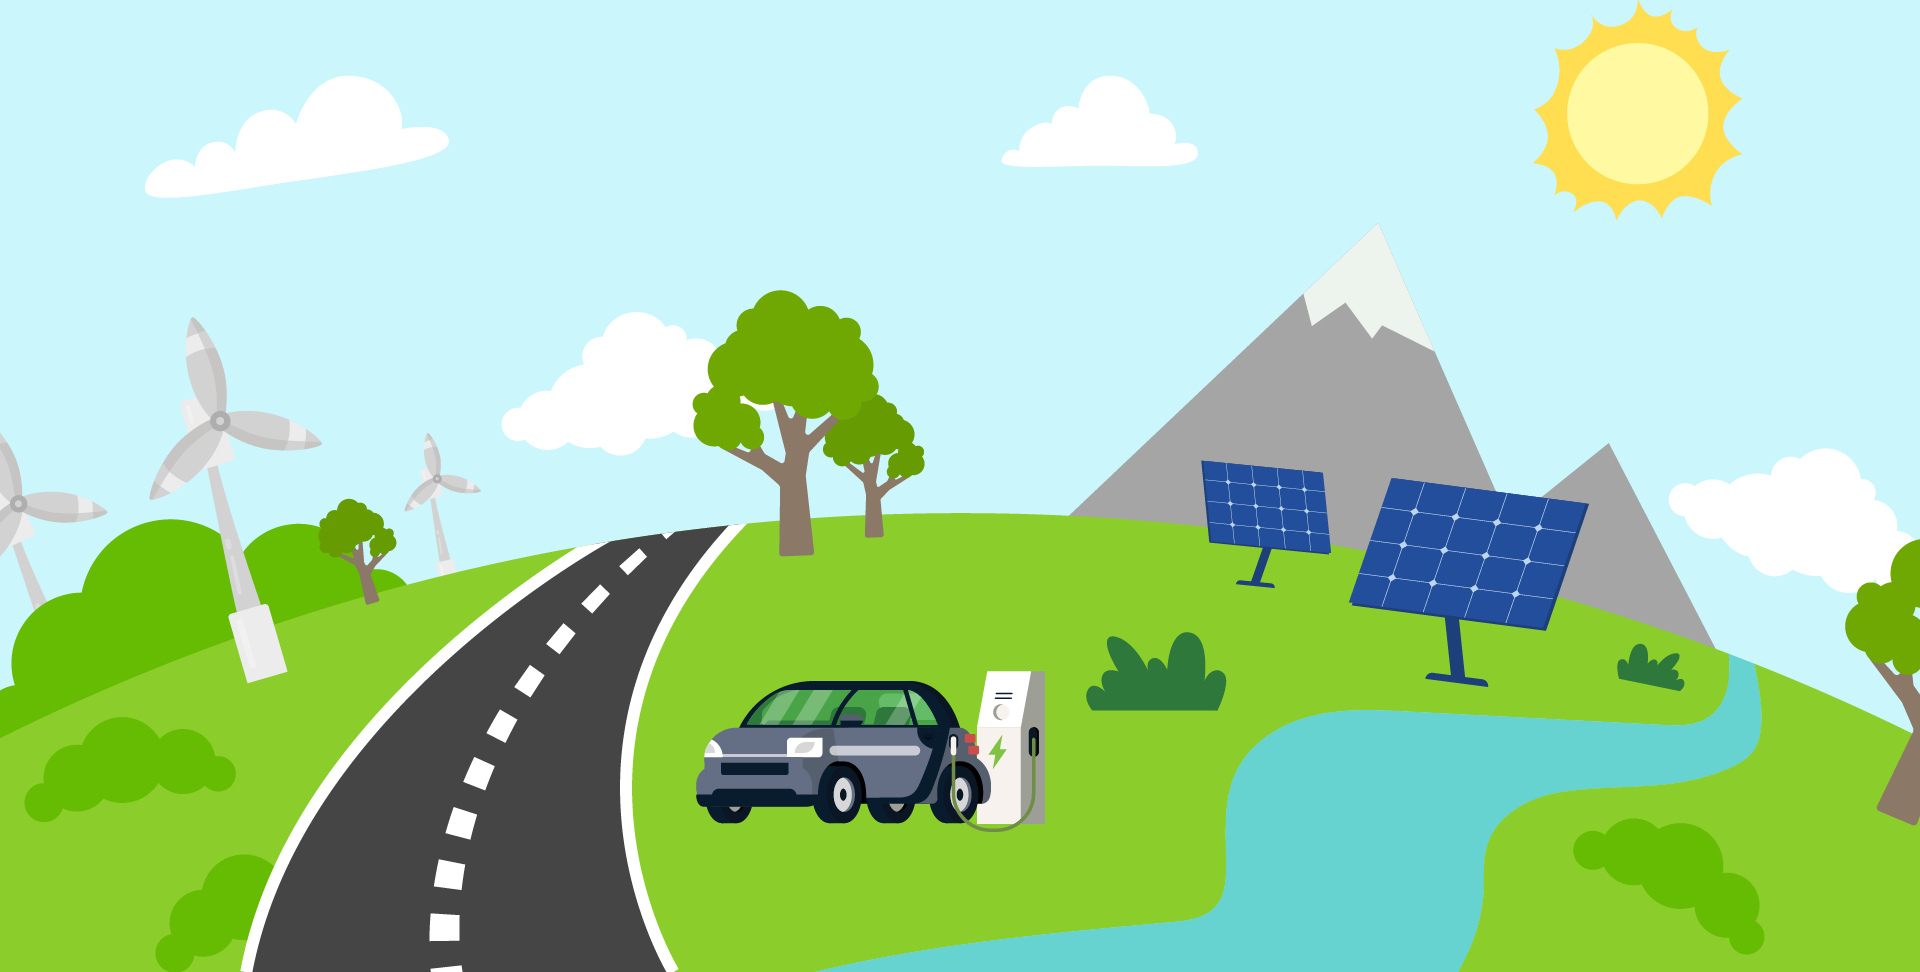 Graphic of grassy landscape with a road, river, electric car, trees, wind turbines, mountains, the sun, and solar panels.